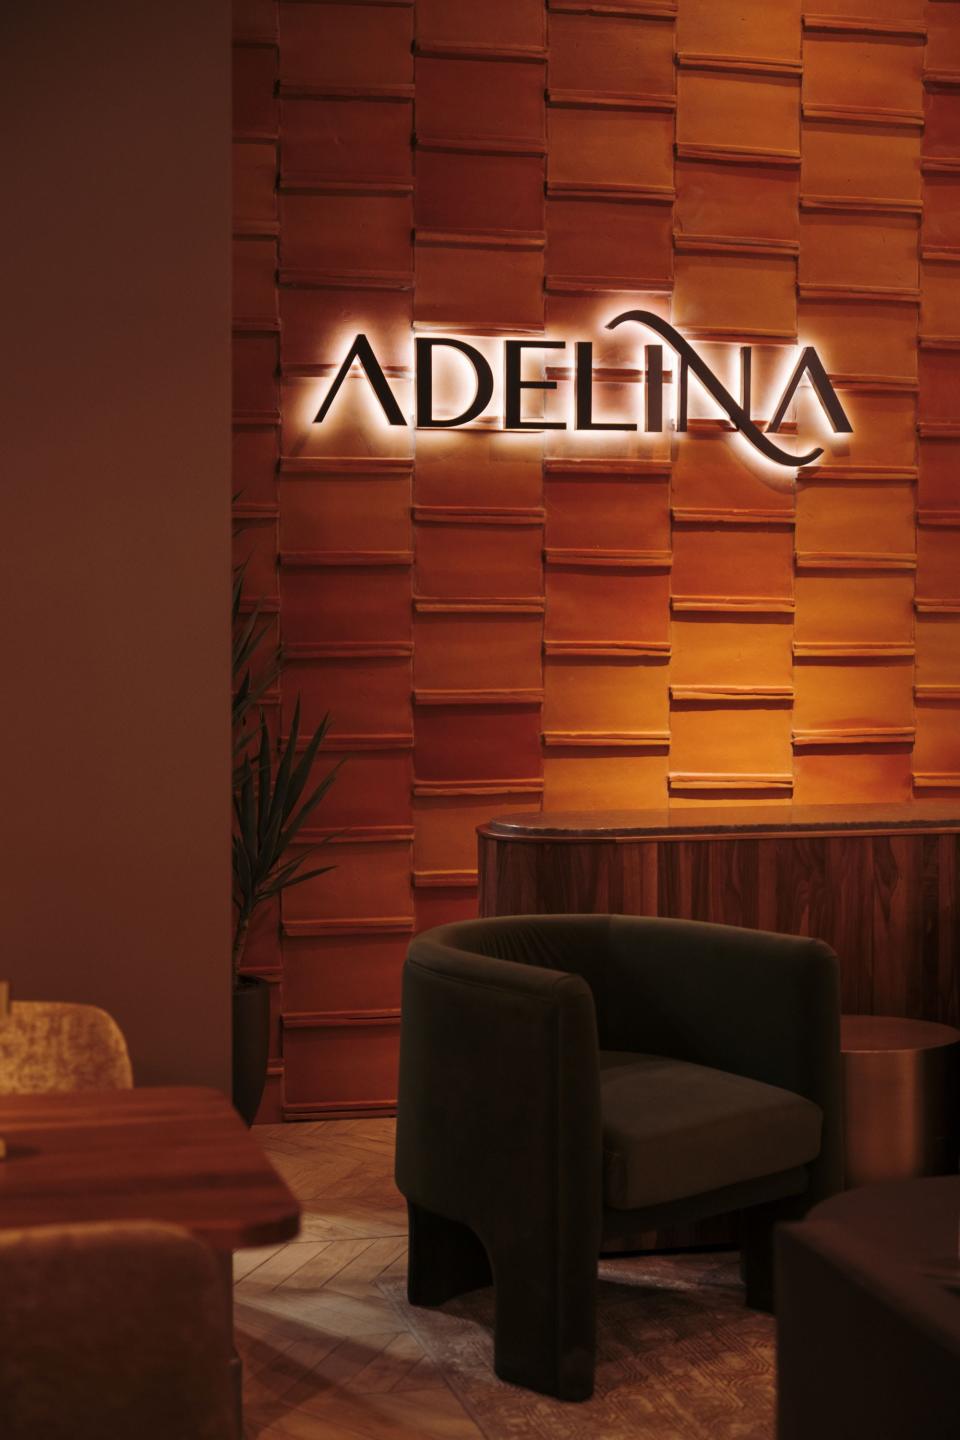 Adelina, a new Italian fare restaurant with a Mediterranean twist openings March 21 in downtown Detroit.